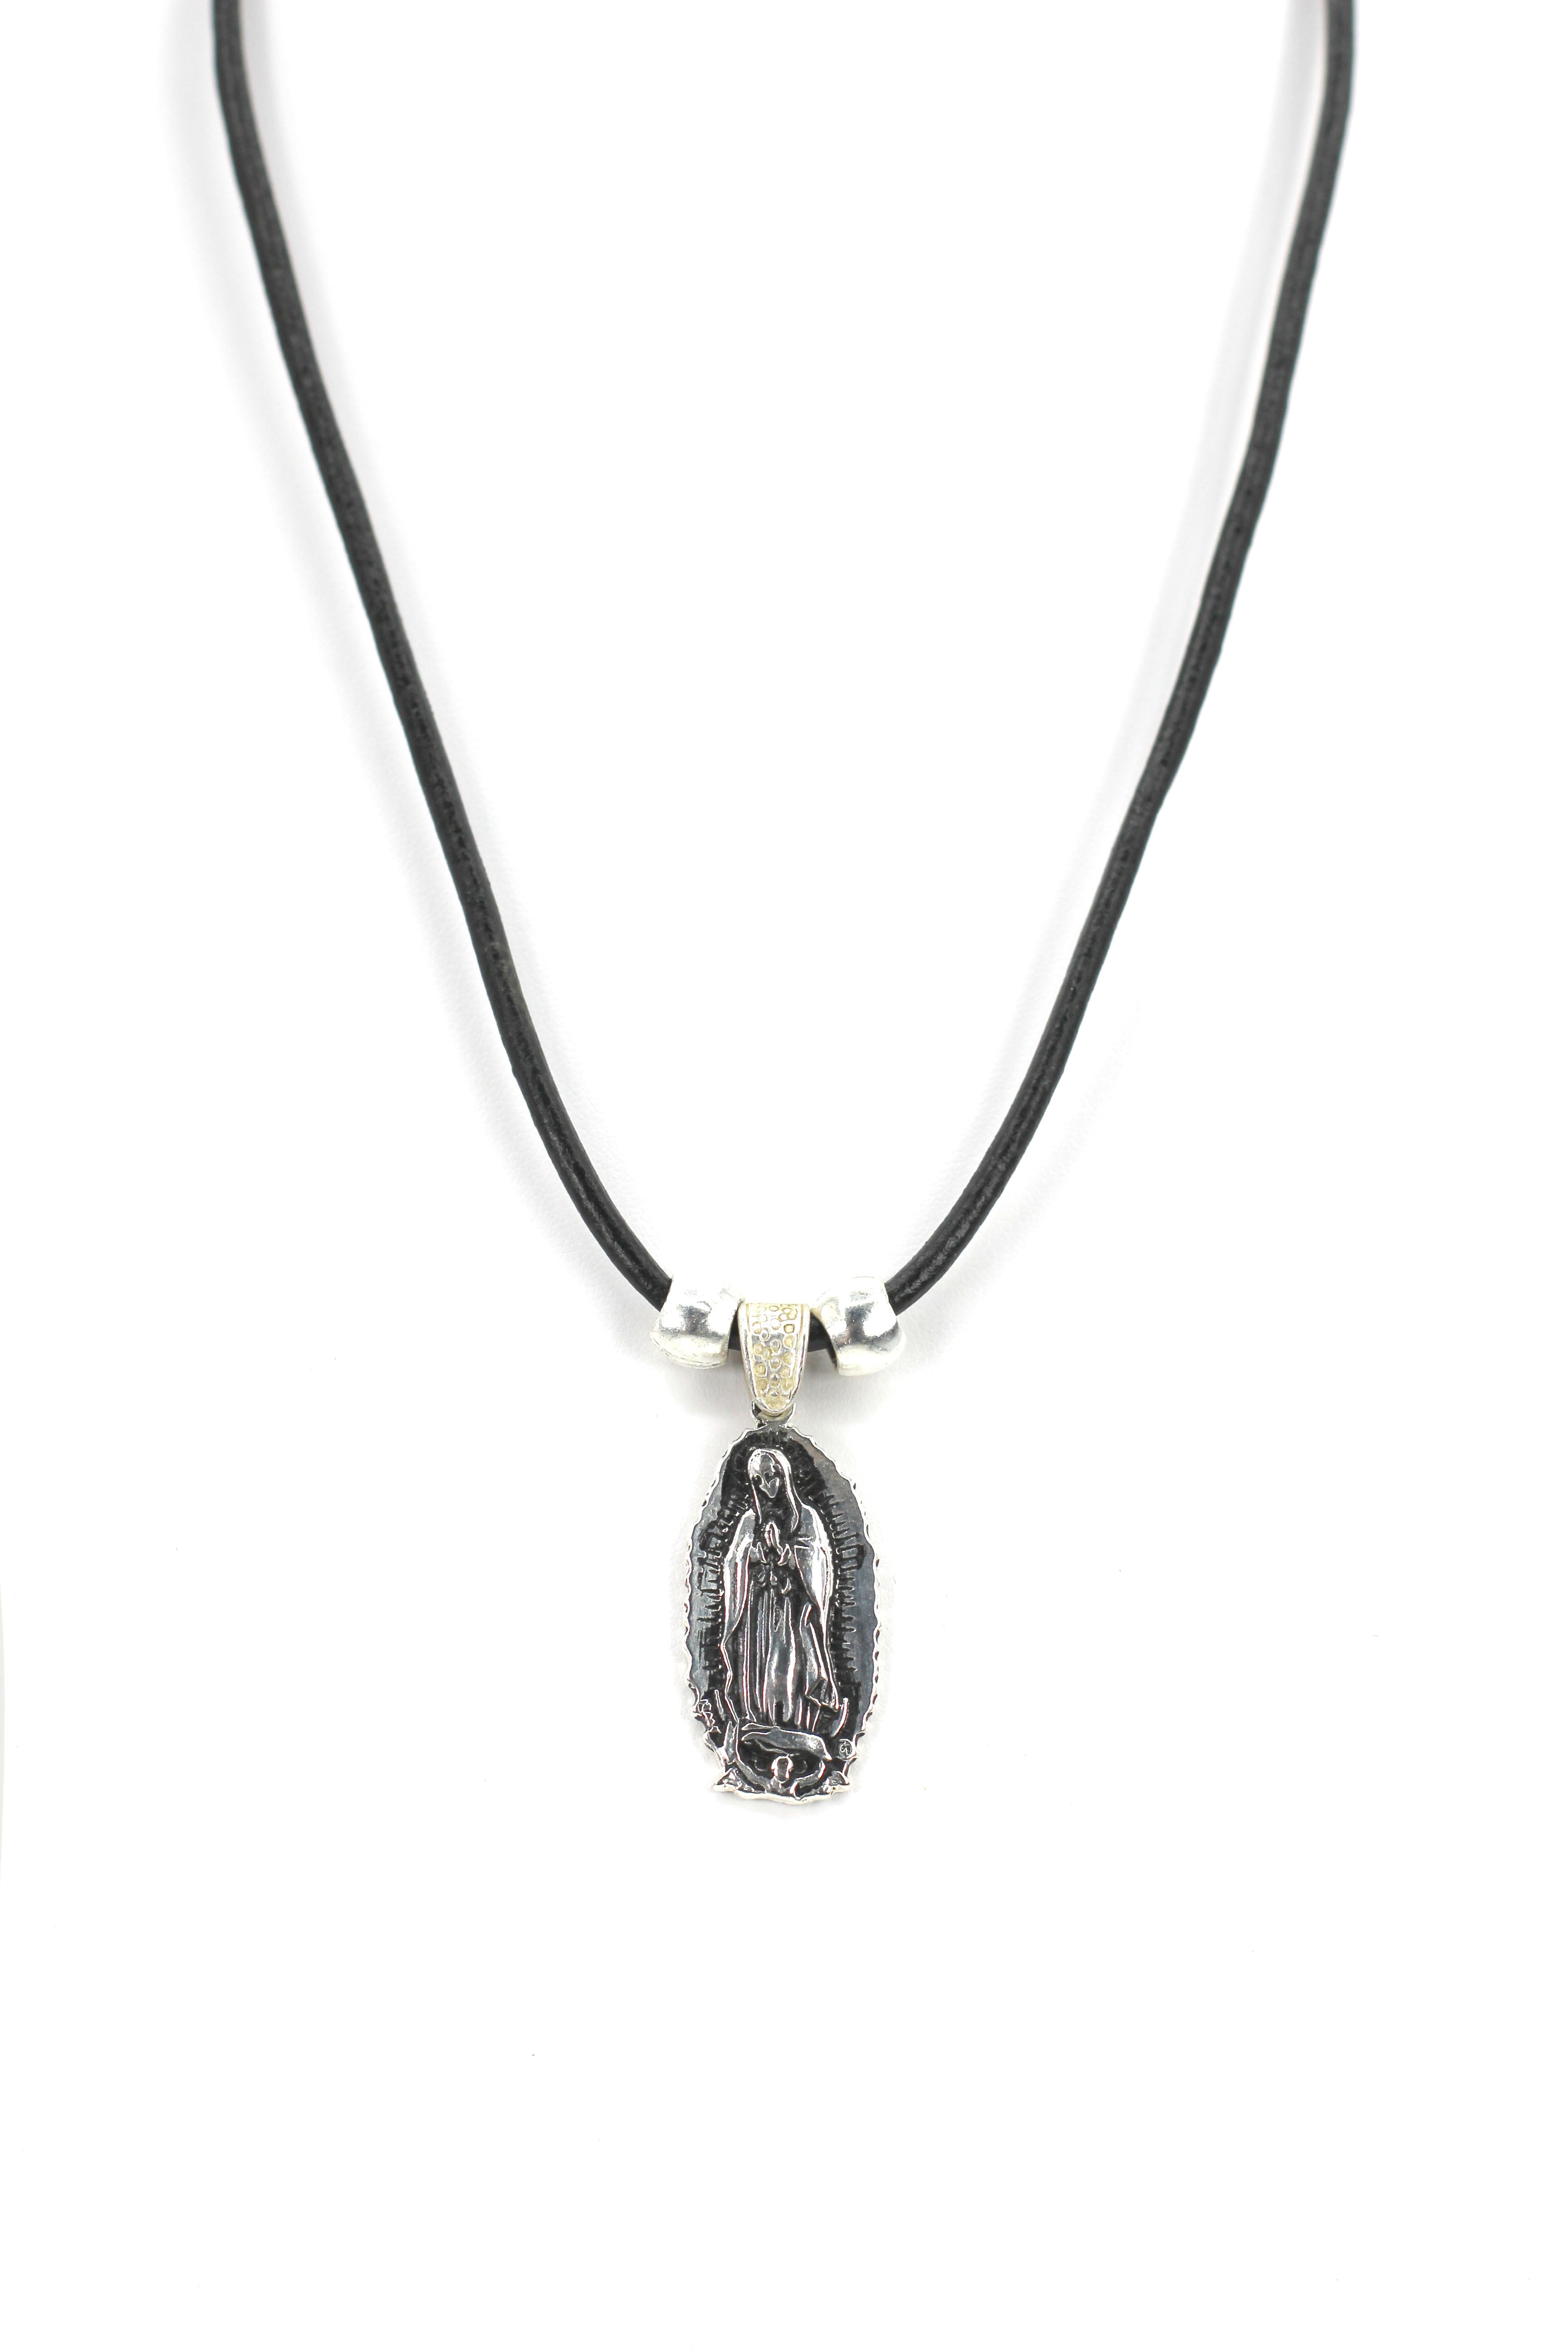 Vintage Necklace of Our Lady Of Guadalupe - Nuestra Sra de Guadalupe Oval Shape Jewelry with Genuine Leather strap by Graciela's Collection